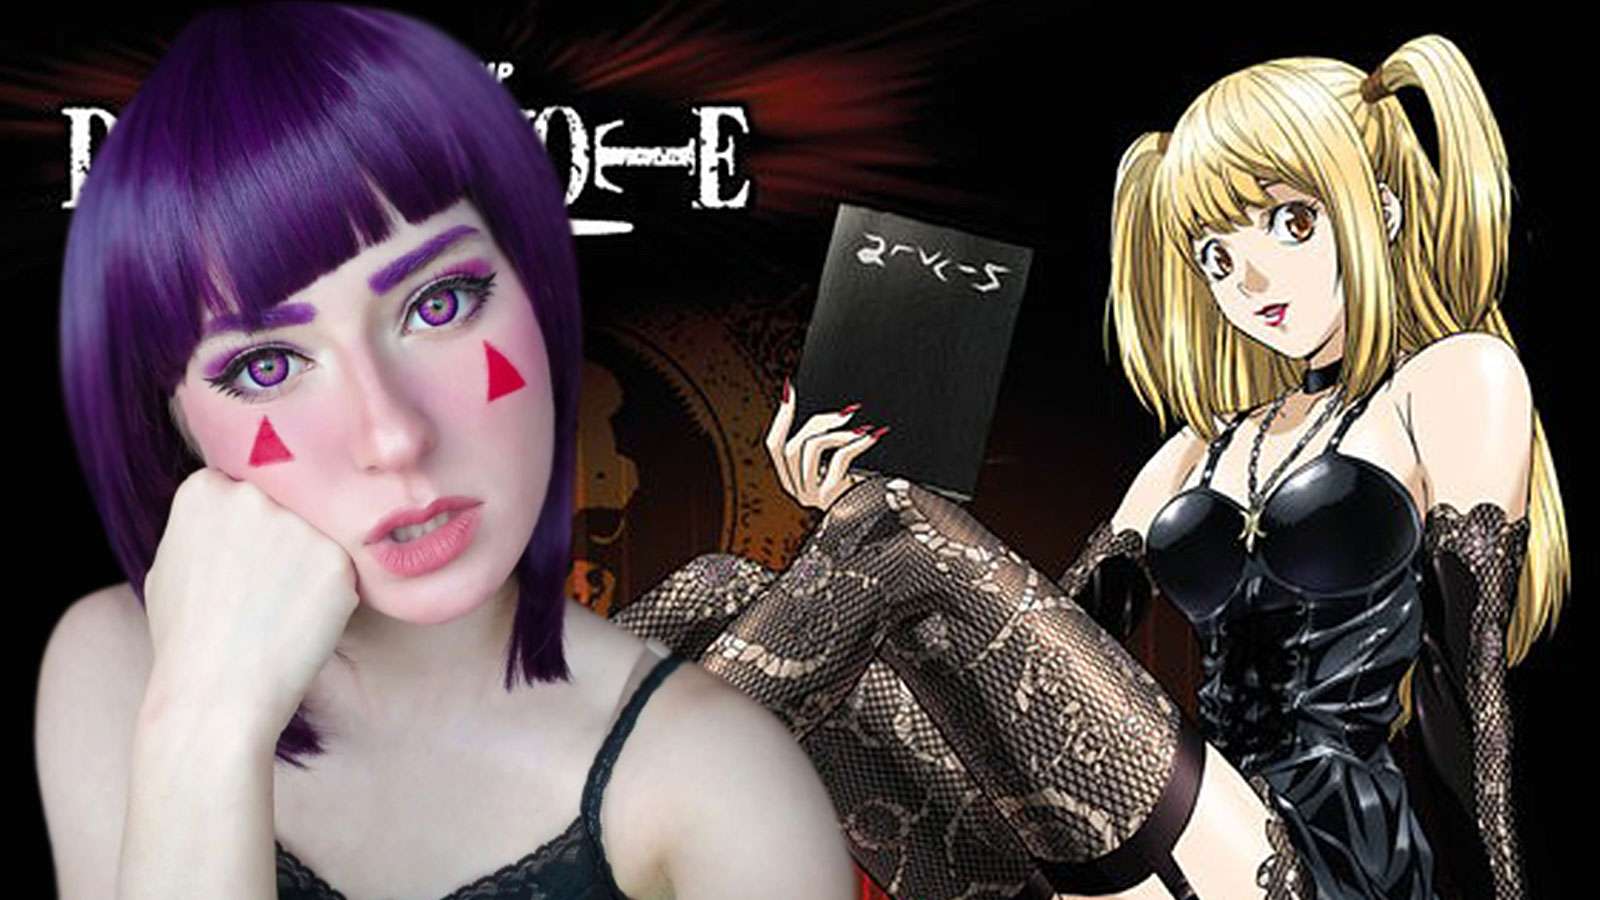 Cosplayer Chiakos is pictured next to a drawing of Death Note's Misa Amane.